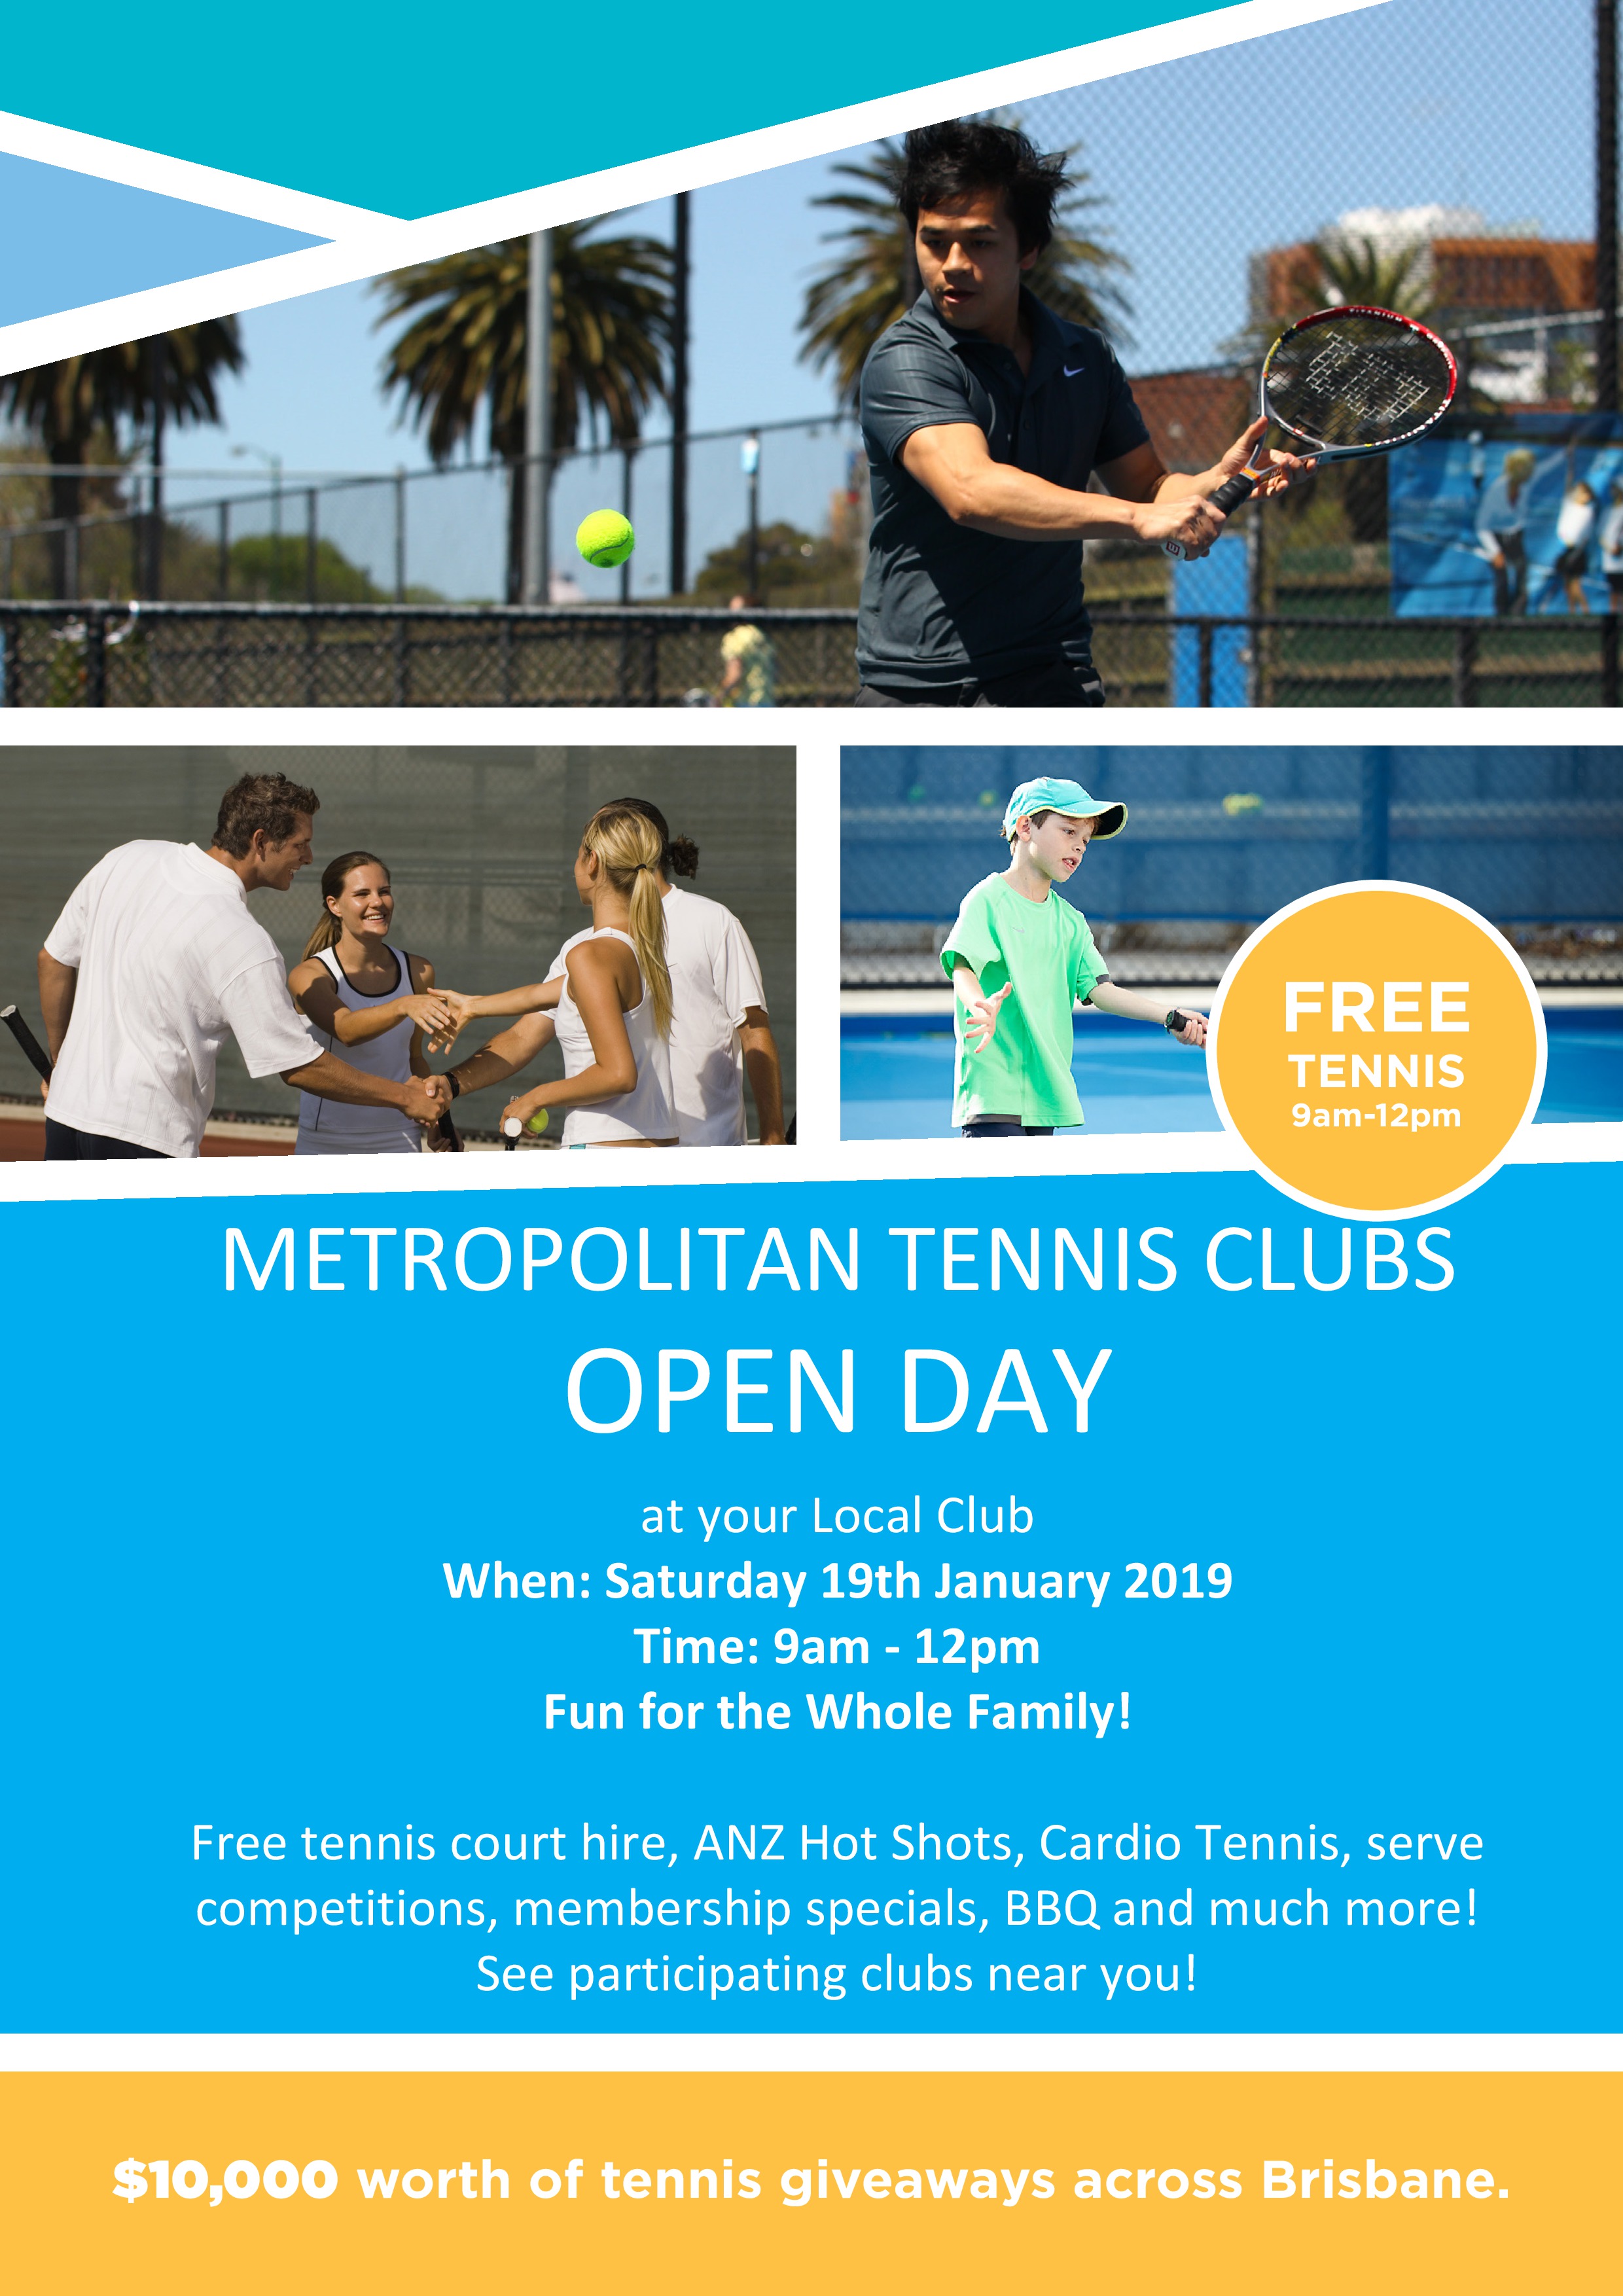 Free Tennis Open Day – For all tennis players in Brisbane